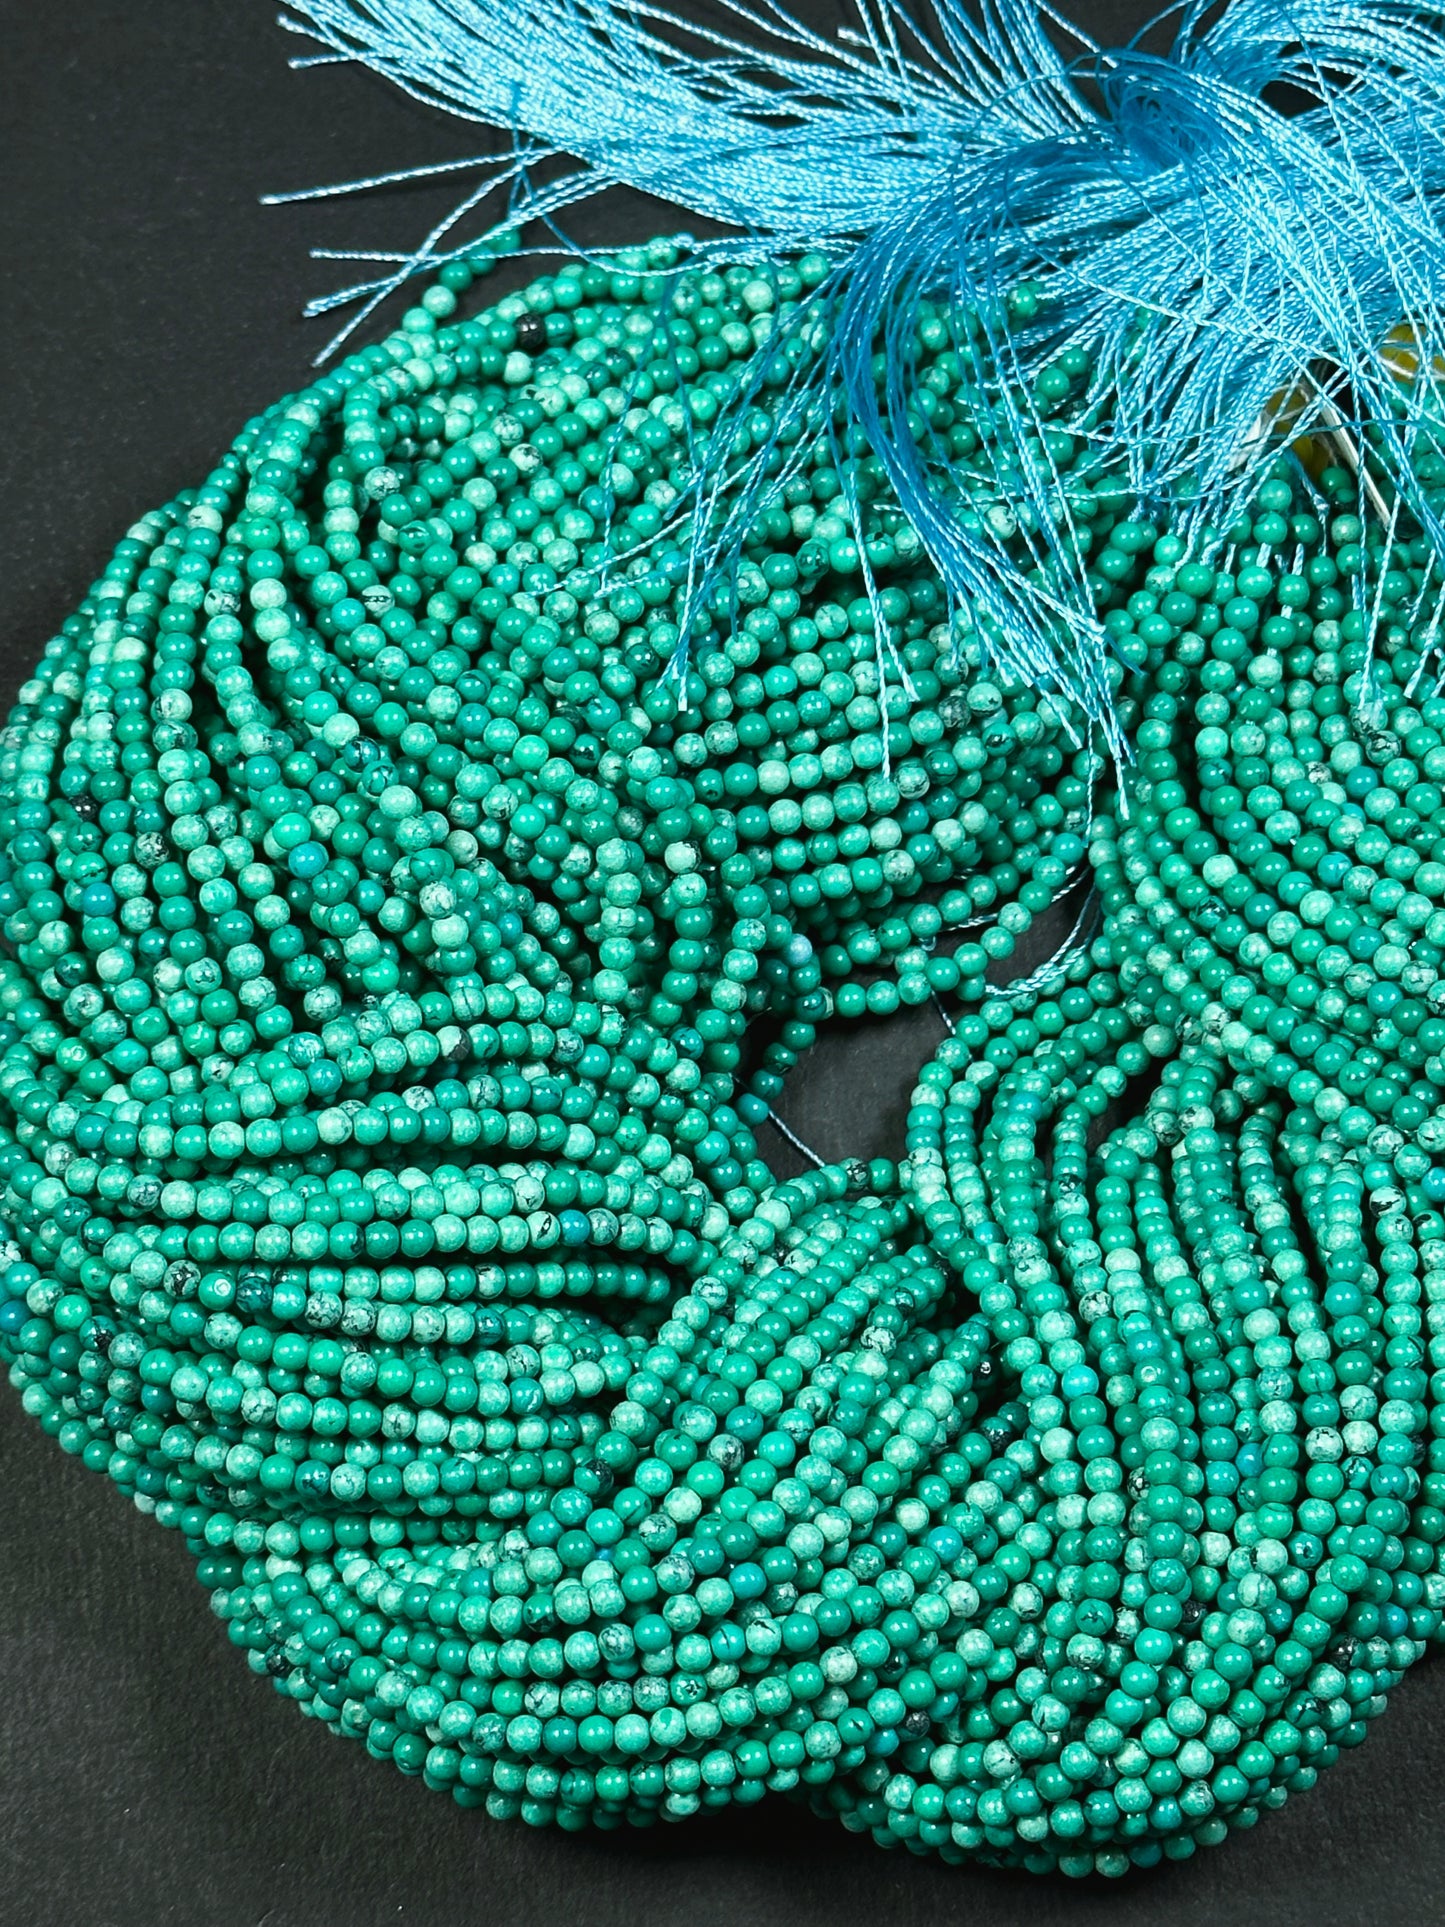 AAA Natural Turquoise Gemstone Bead 3mm Round Beads, Beautiful Green Blue Color Turquoise Gemstone Beads Excellent Quality Full Strand 15.5"